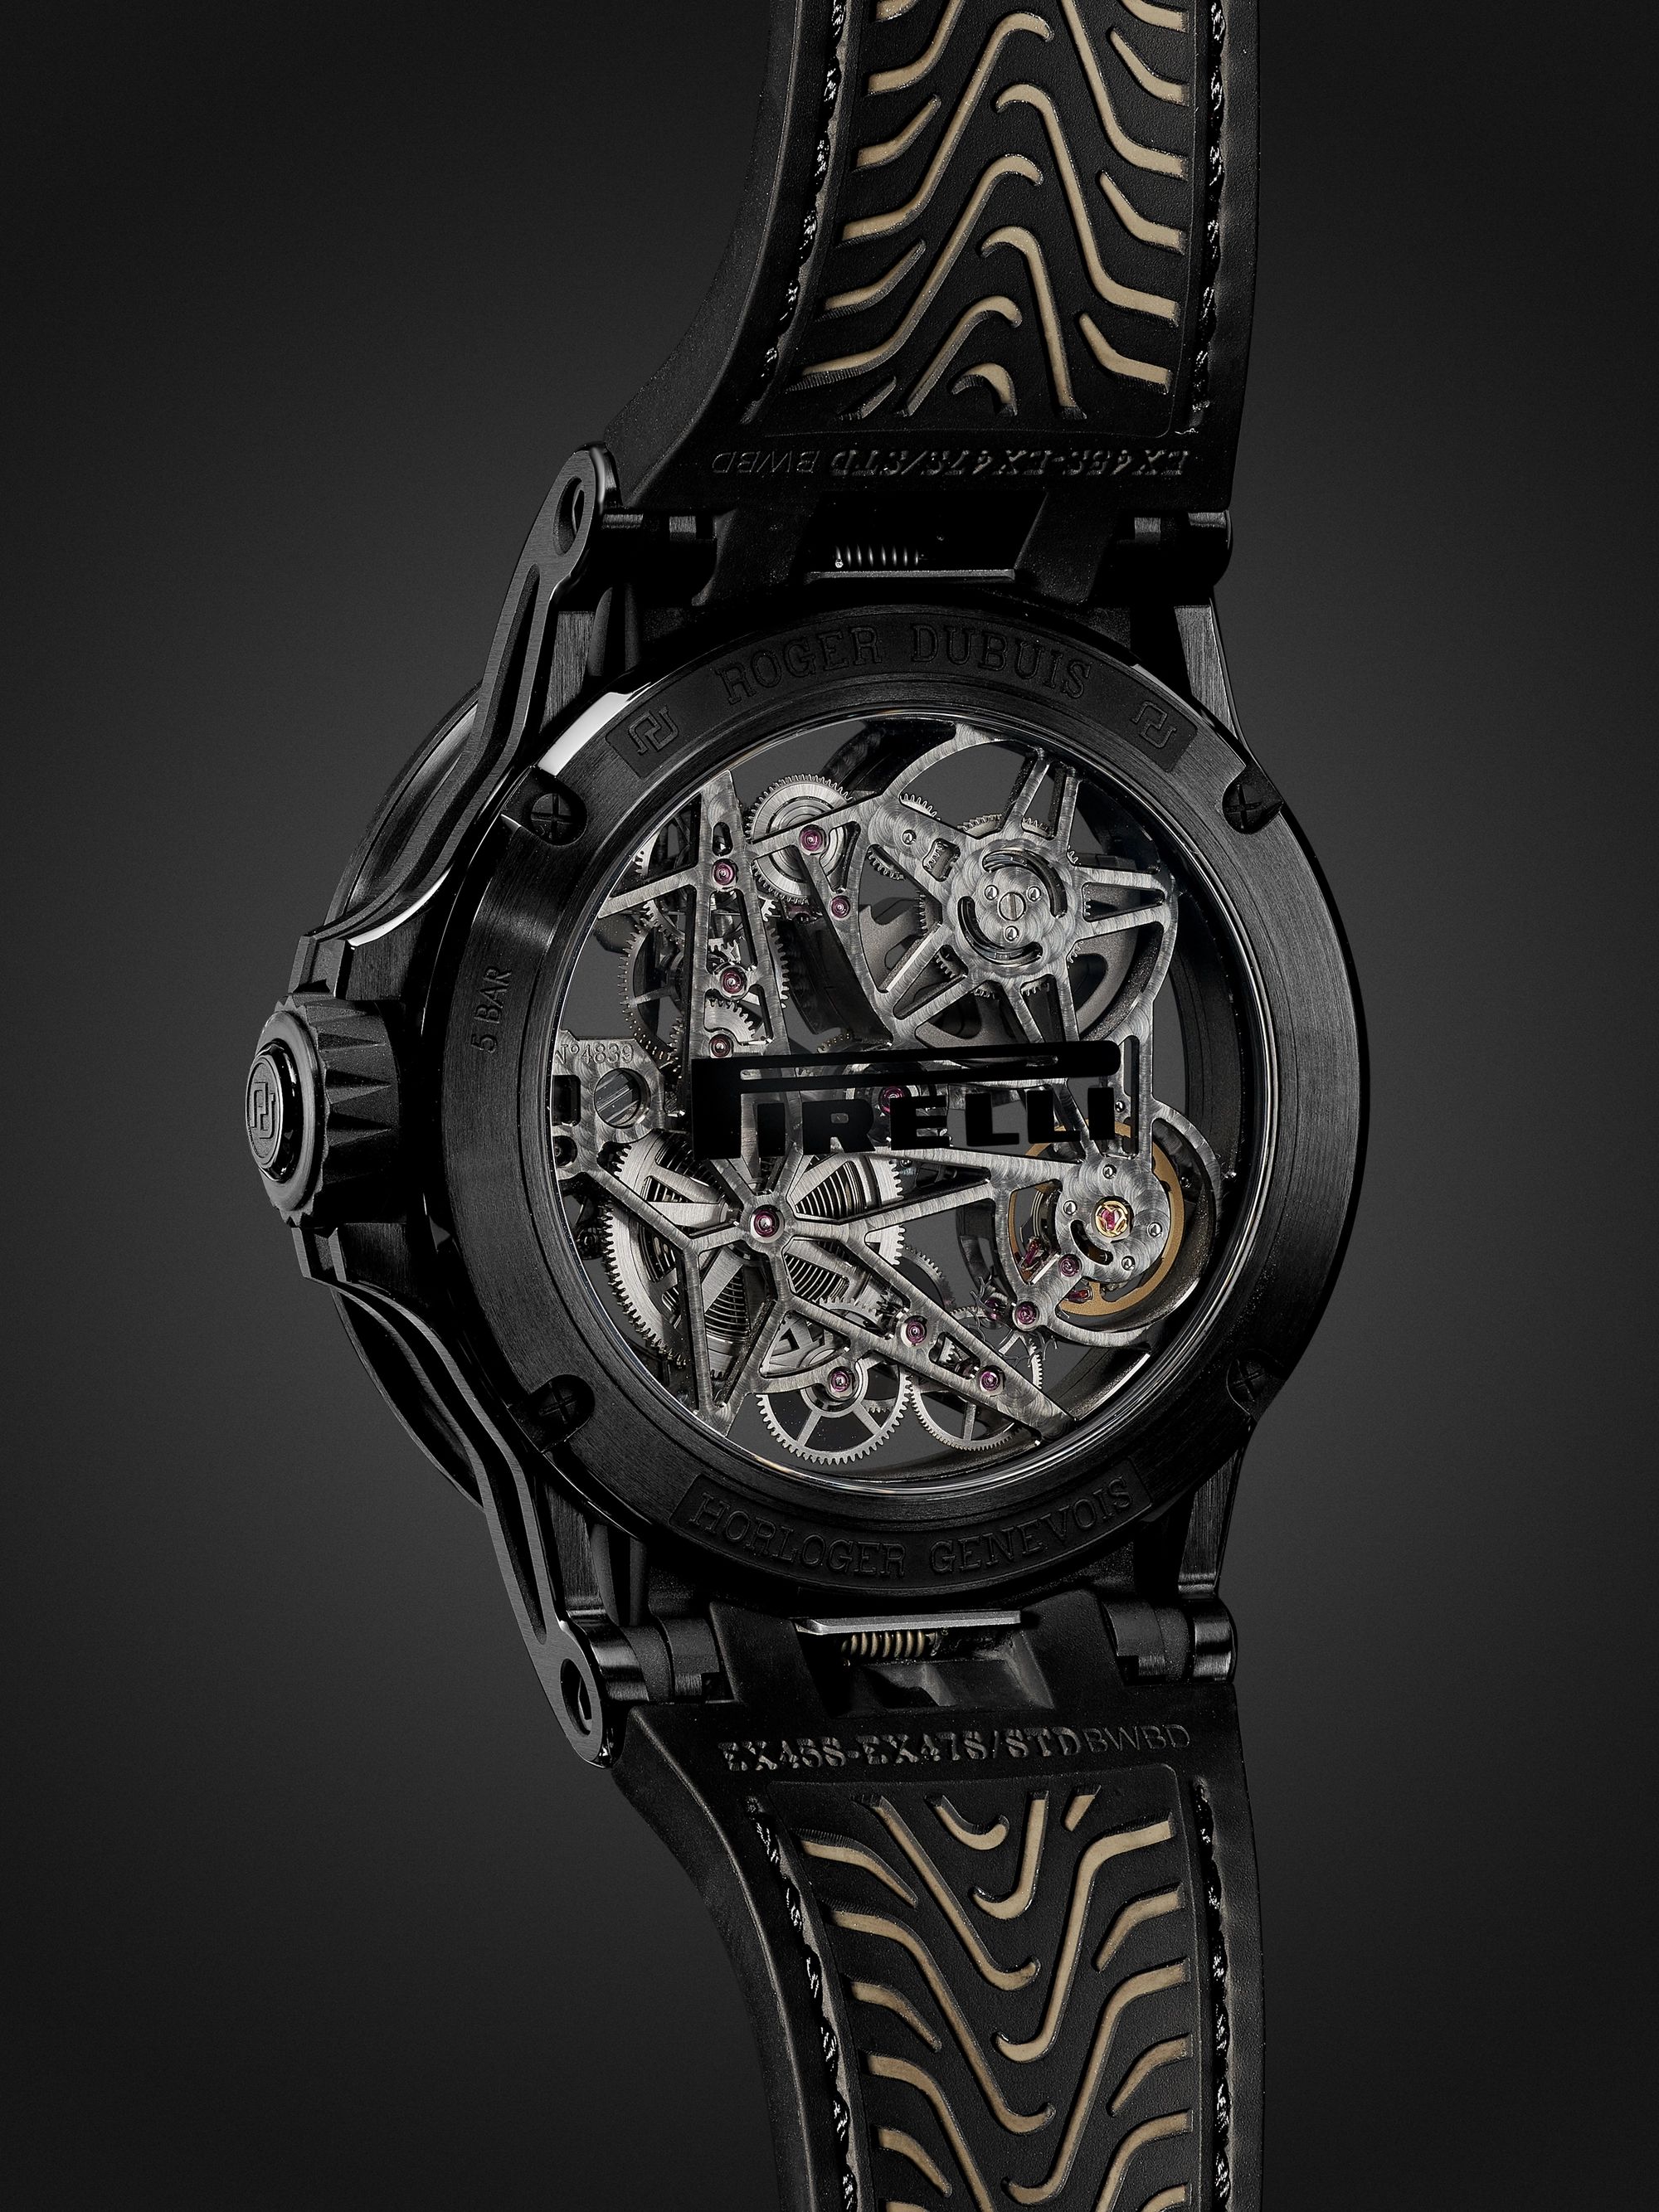 ROGER DUBUIS Excalibur Spider Pirelli Automatic Skeleton 45mm Black DLC-Coated Titanium and Rubber Watch, Ref. No. RDDBEX0826